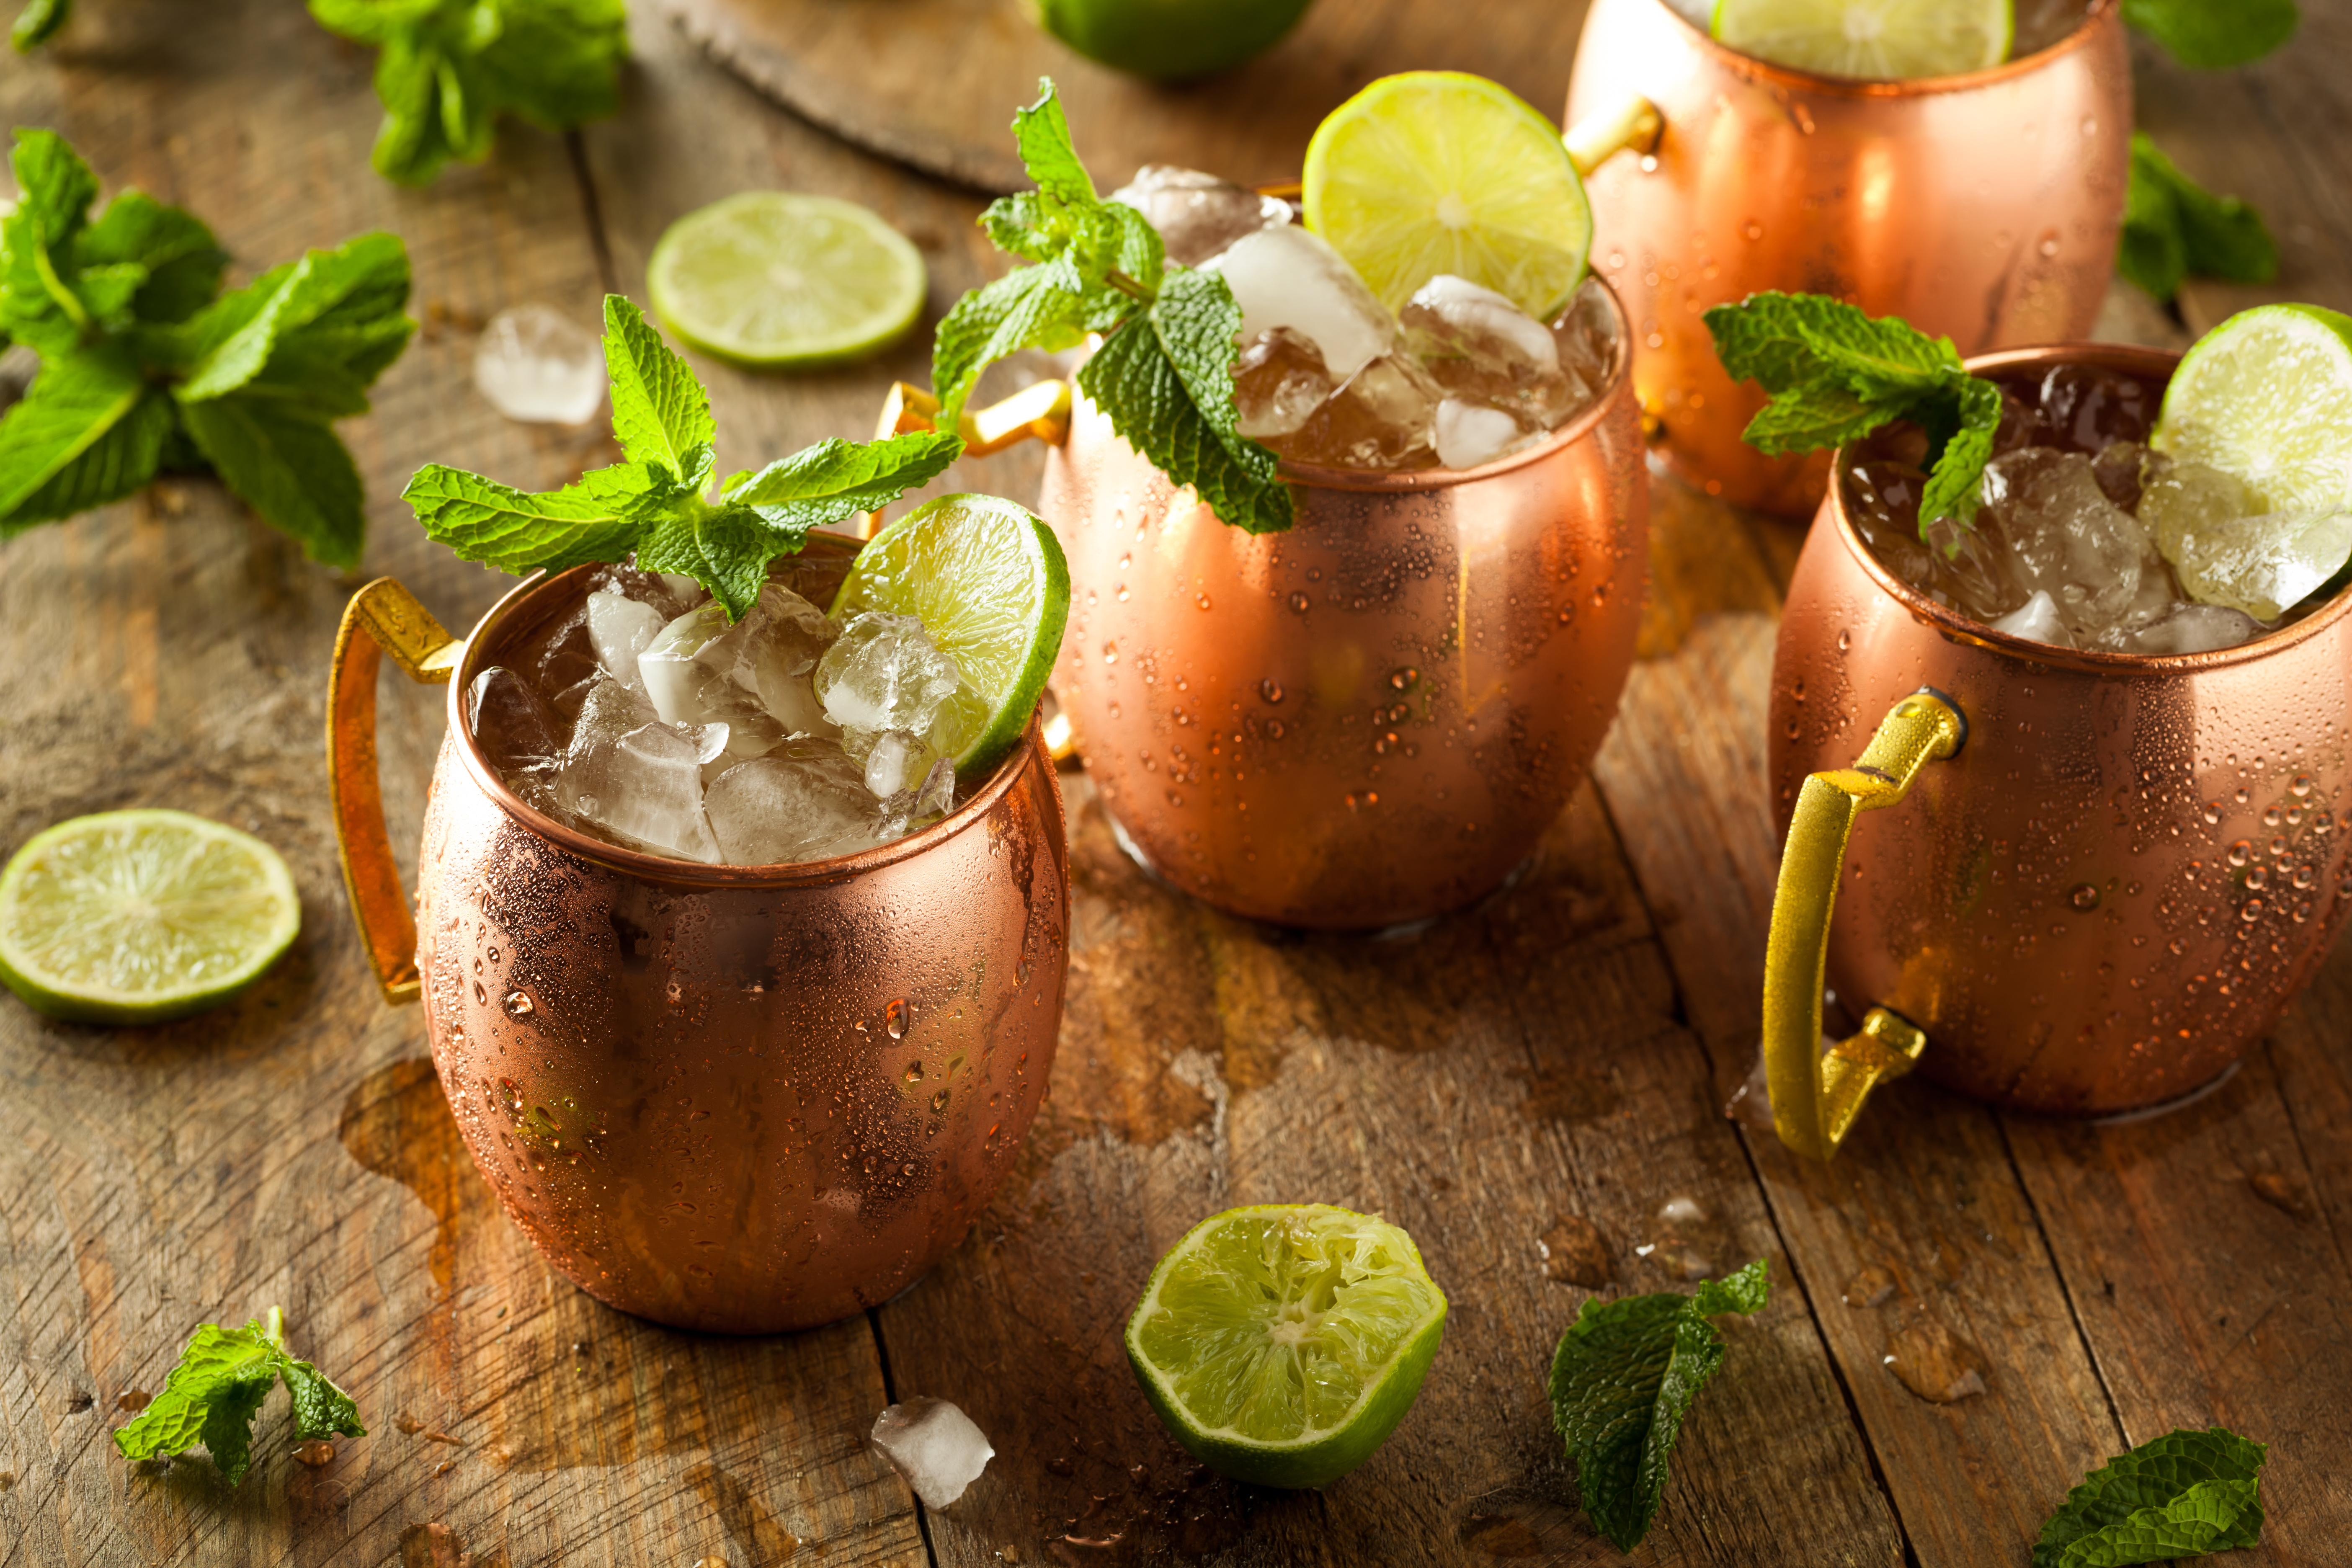 Are There Contests for the Best Moscow Mules